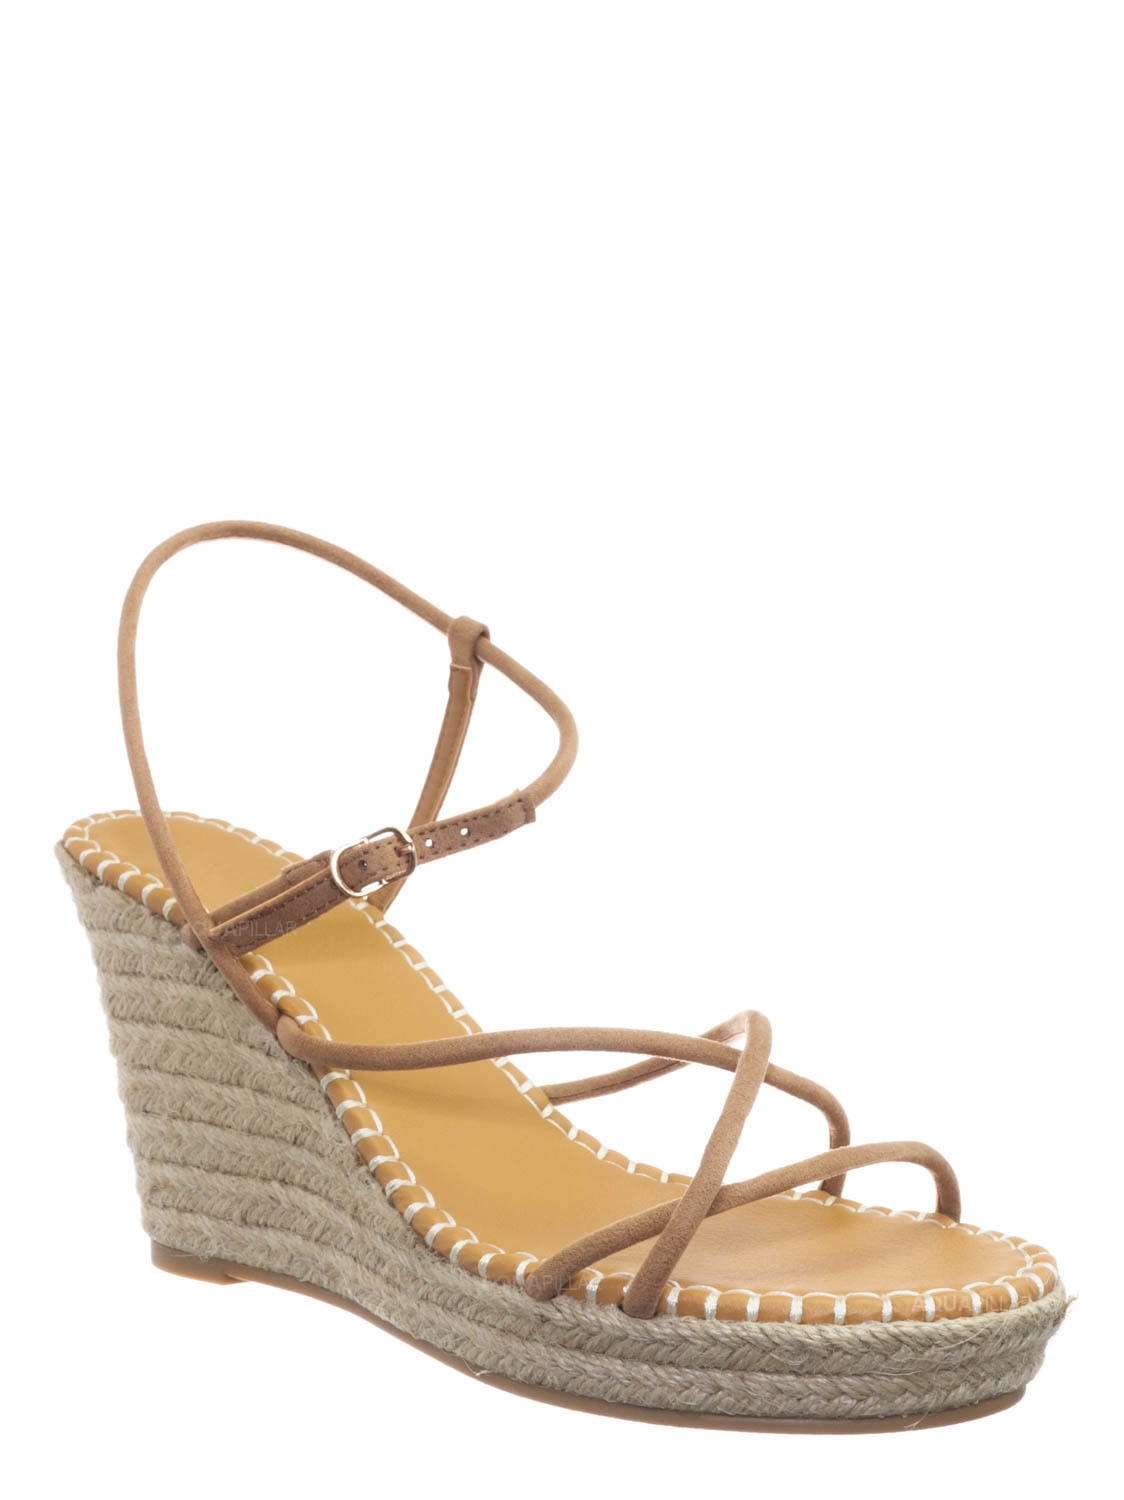 Thin Strap Espadrille Wedge -Women Woven Platform Barely There Sandal ...